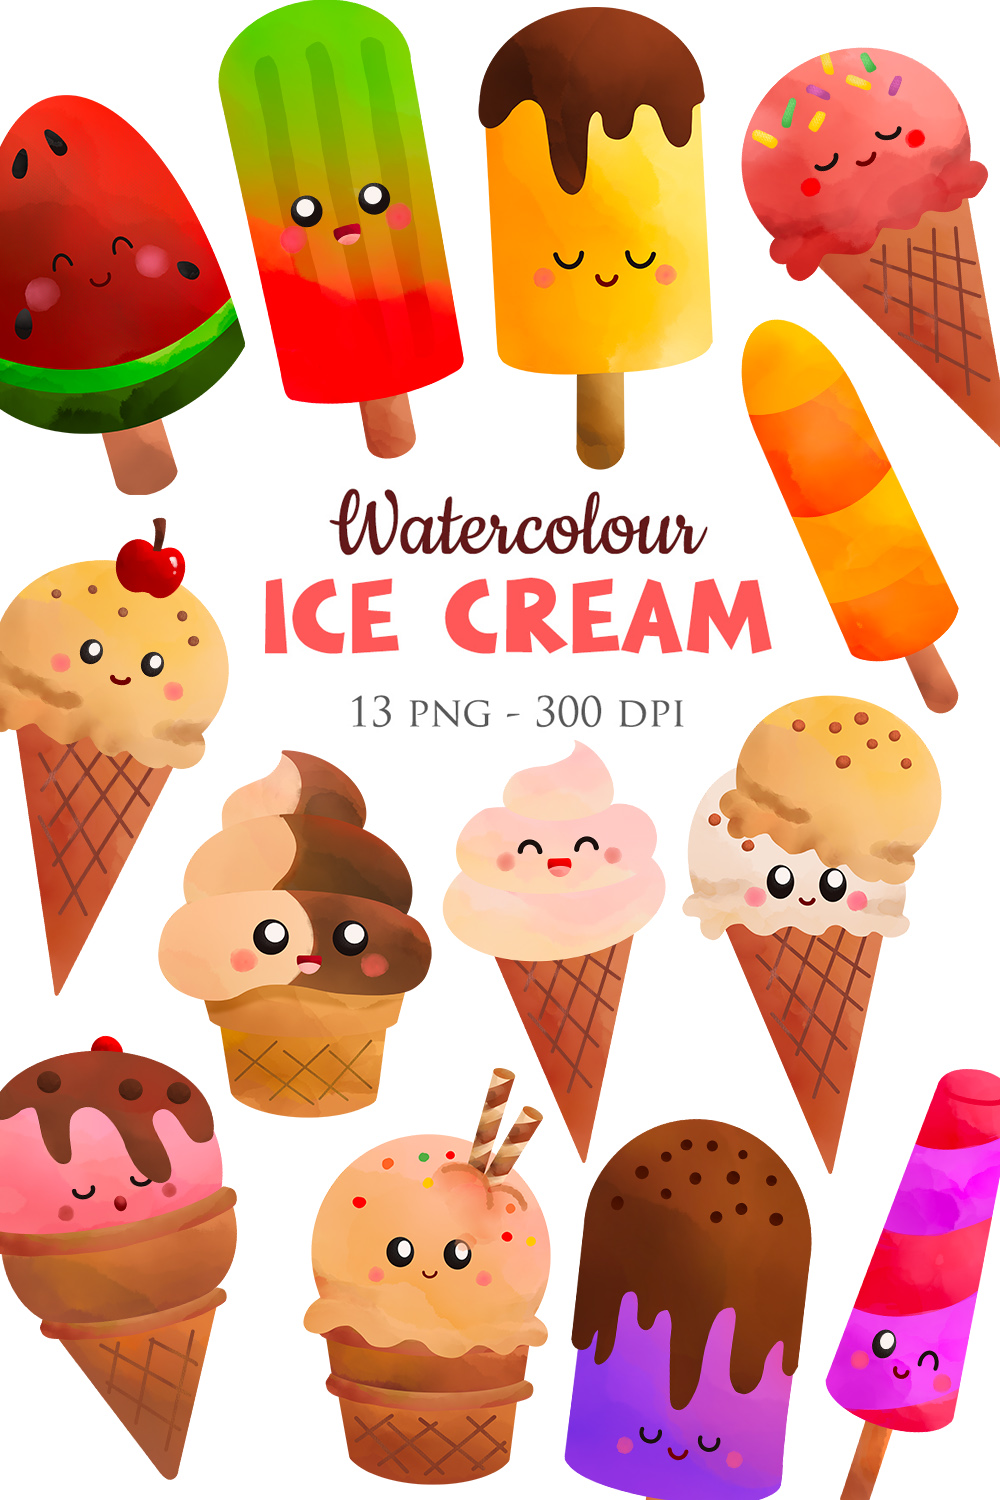 Cute Colorful Watercolour Ice Cream Cone Scoop Dessert Snack Flavored Chocolate Strawberry Fruits Lollipop Illustration Vector Clipart Cartoon pinterest preview image.